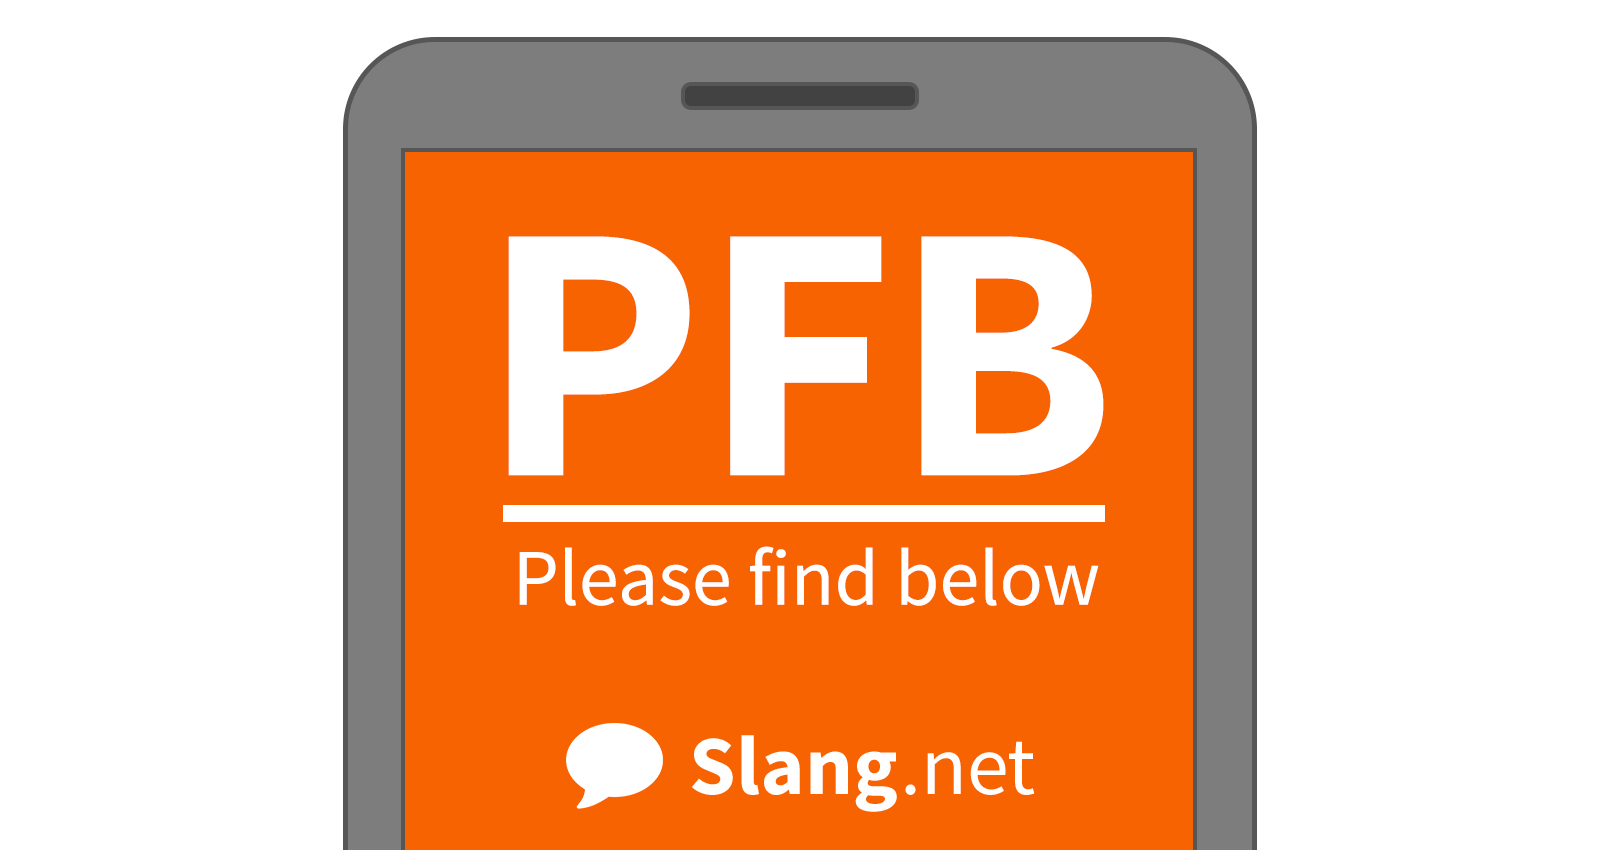 You will likely see PFB in emails and other types of messages.